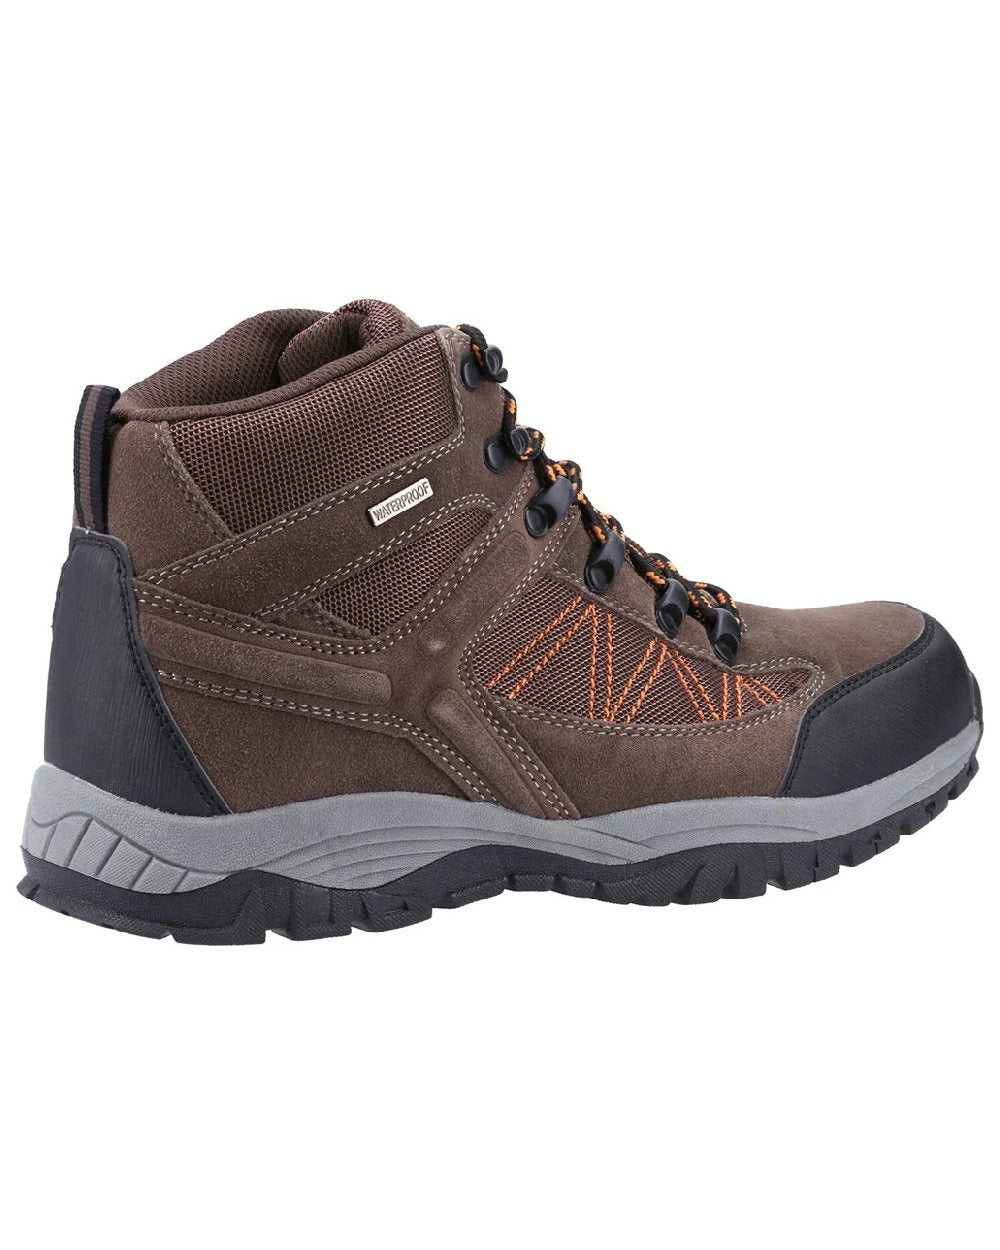 Brown coloured Cotswold Mens Maisemore Hiking Boots on white background 